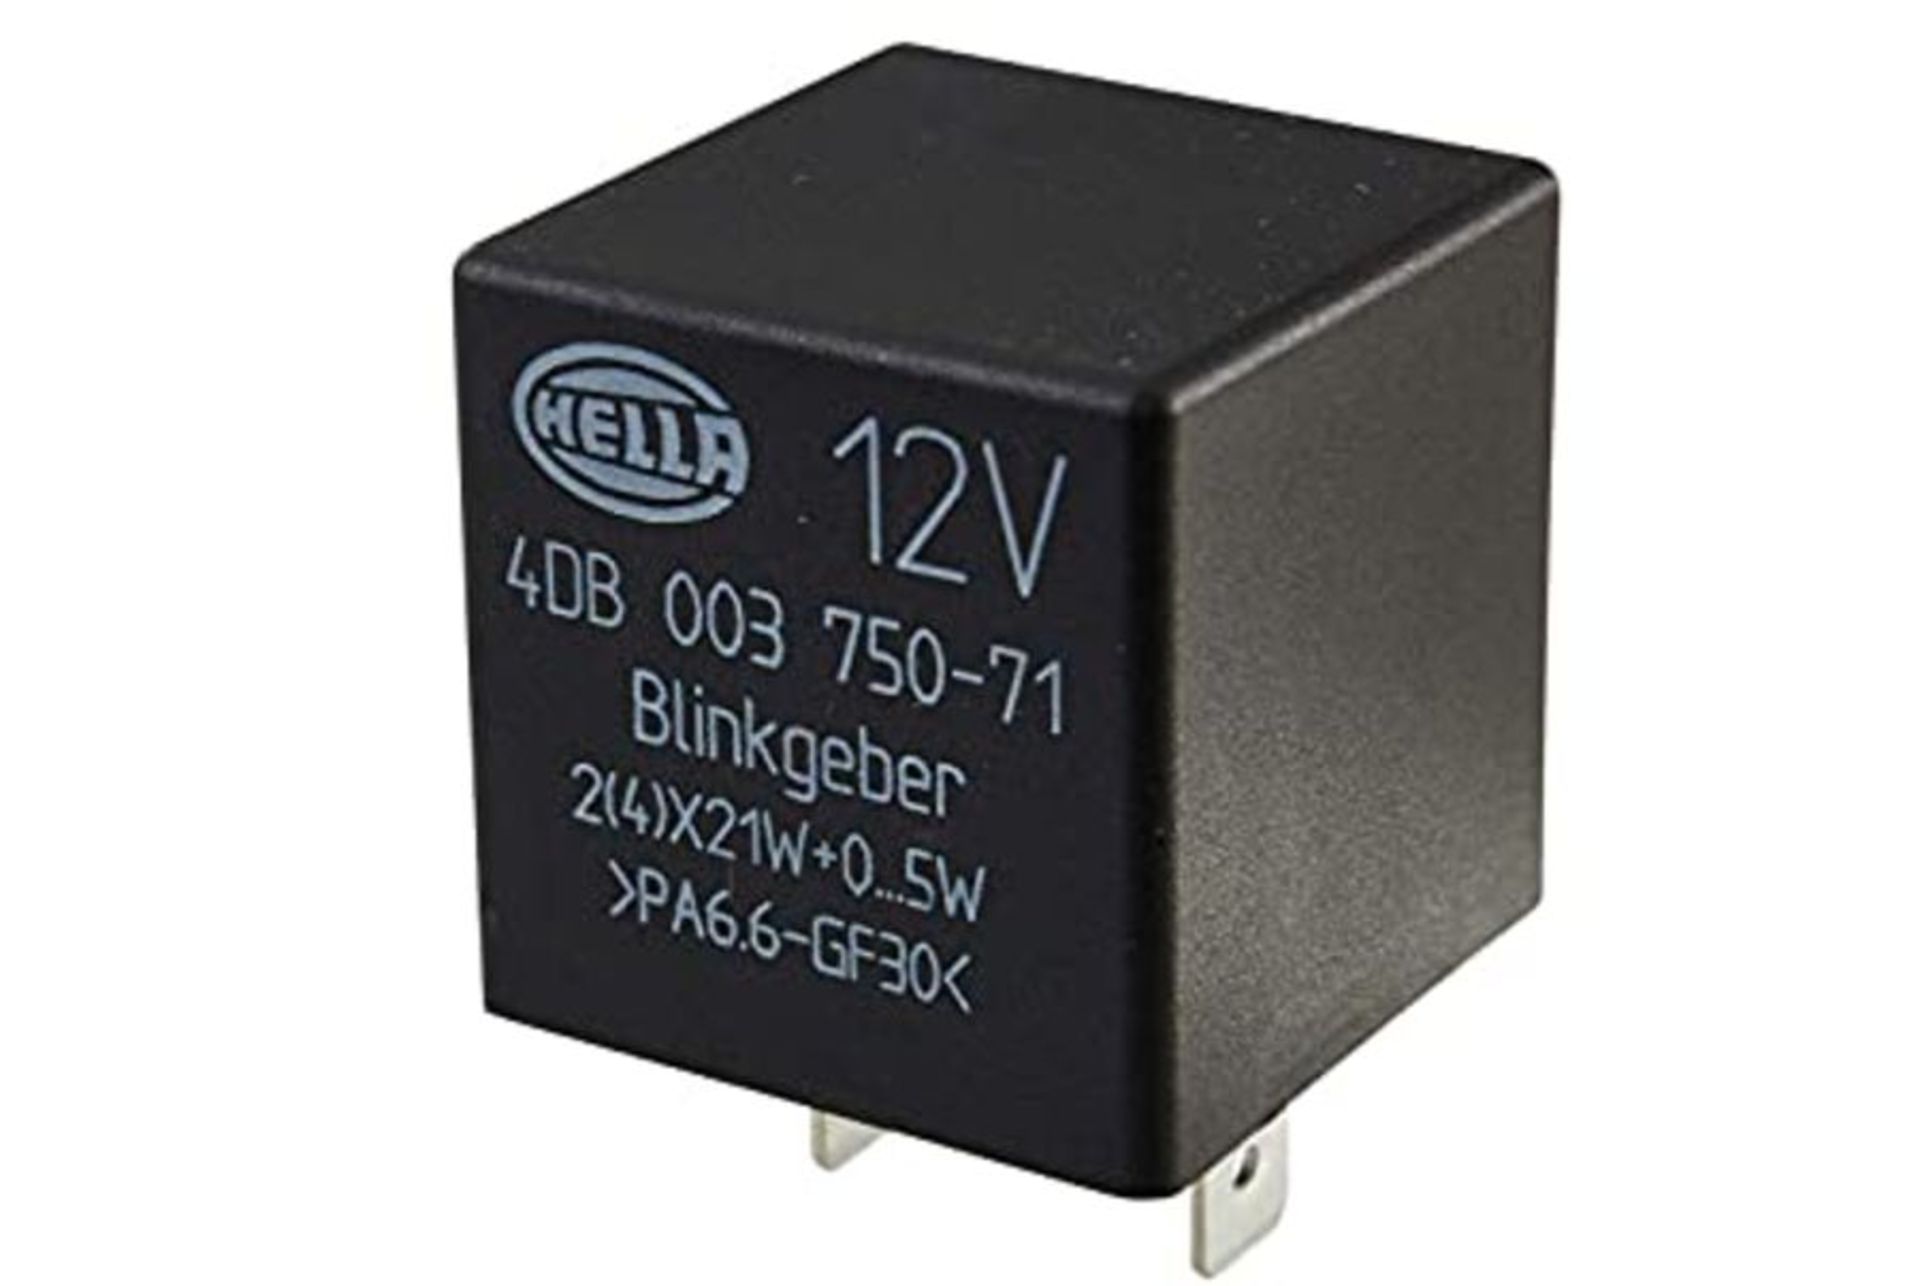 HELLA 4DB 003 750-711 Flasher Unit - 12V - 3-pin connector - Plugged - Electronic